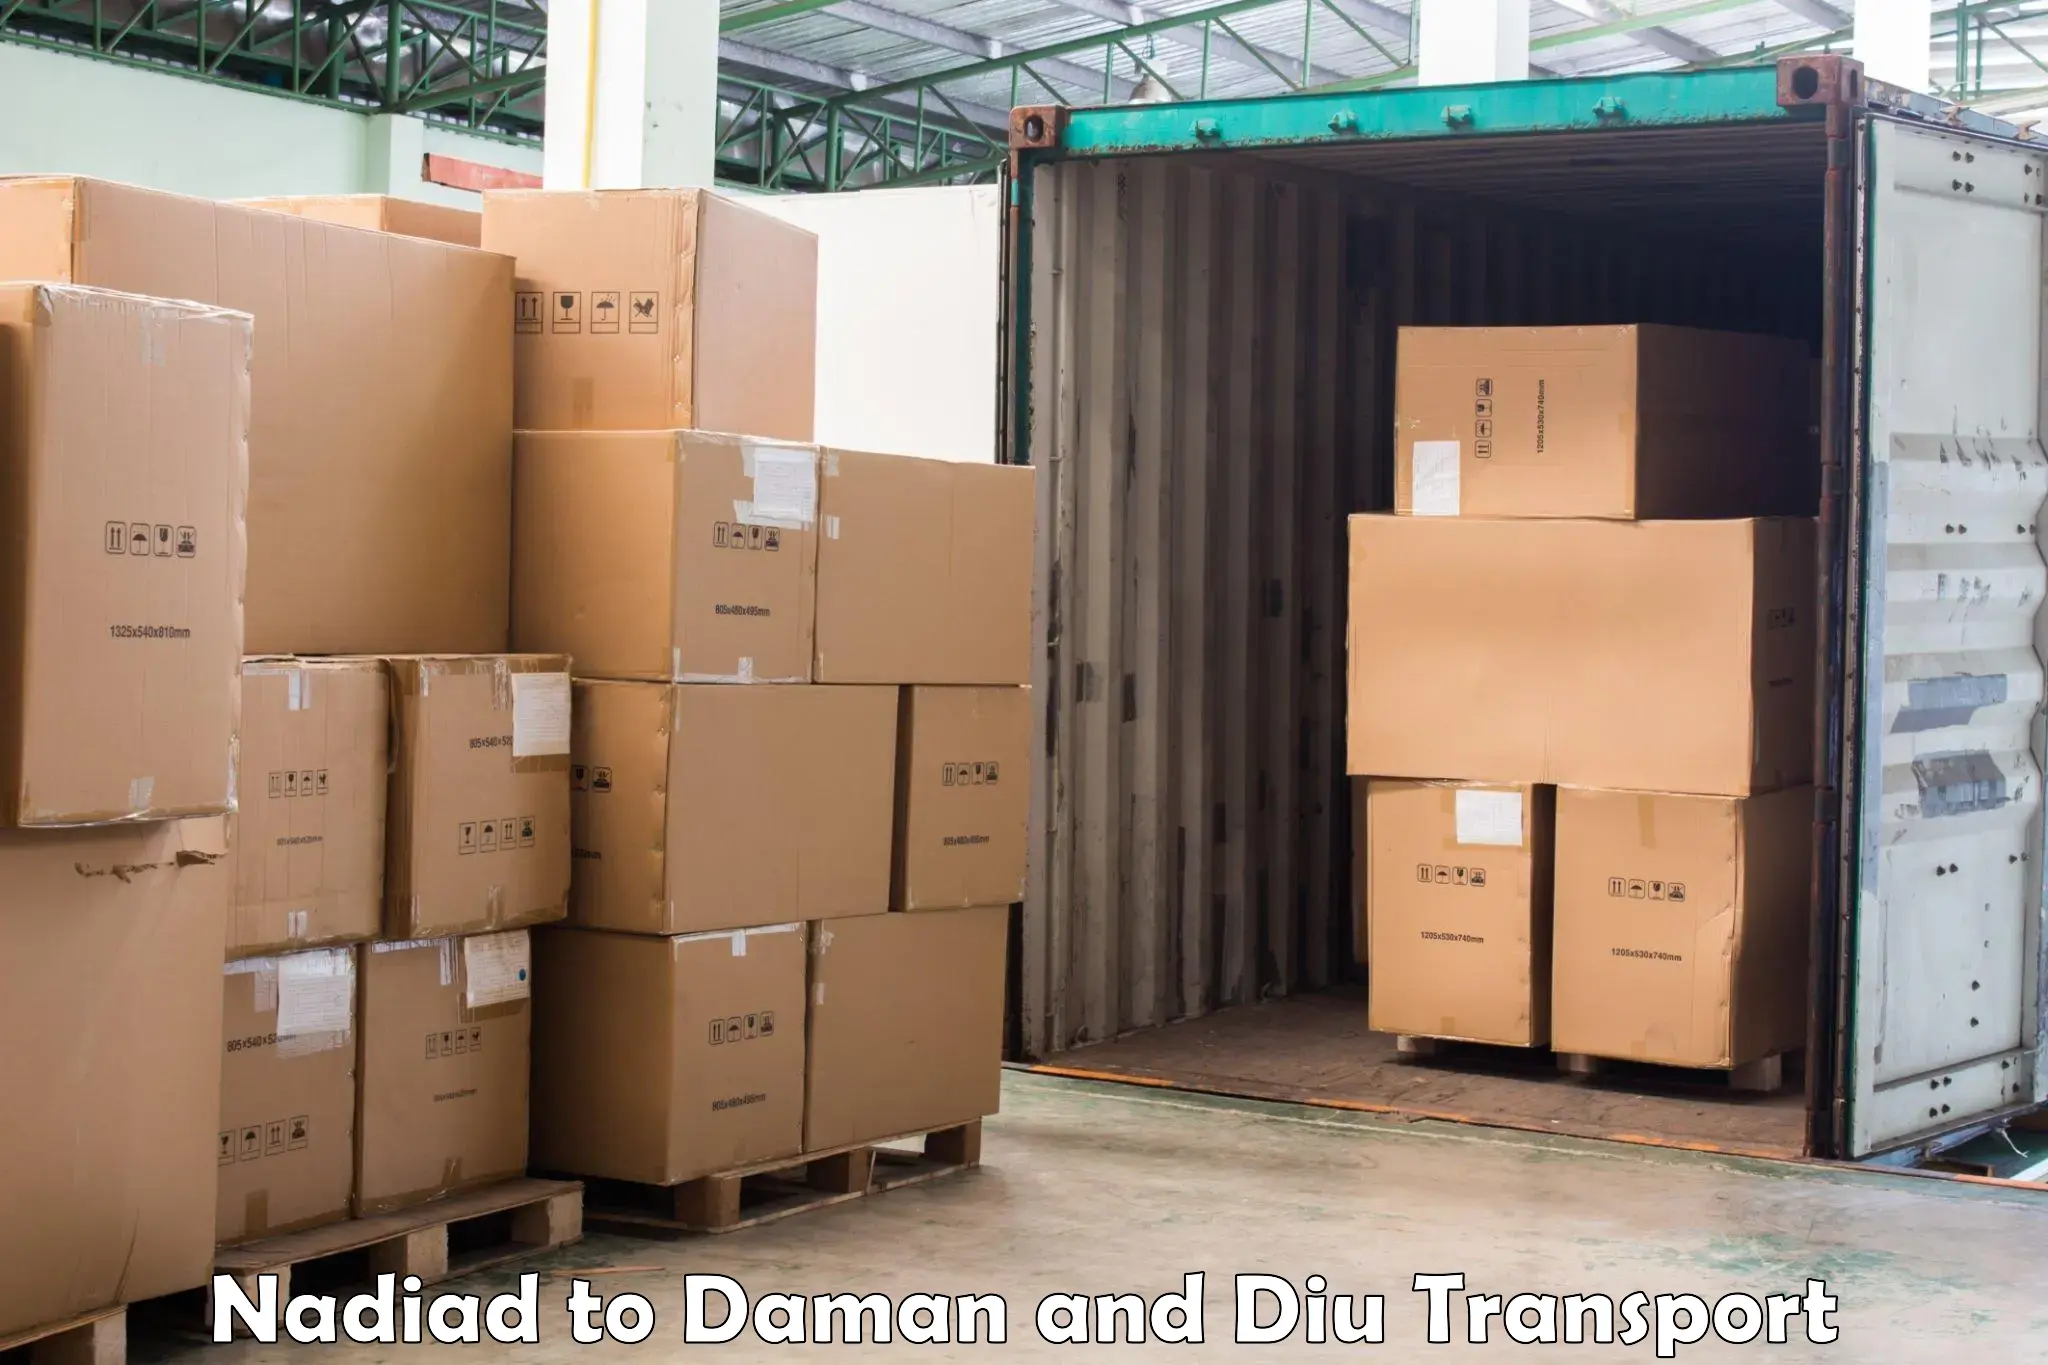 Parcel transport services Nadiad to Daman and Diu